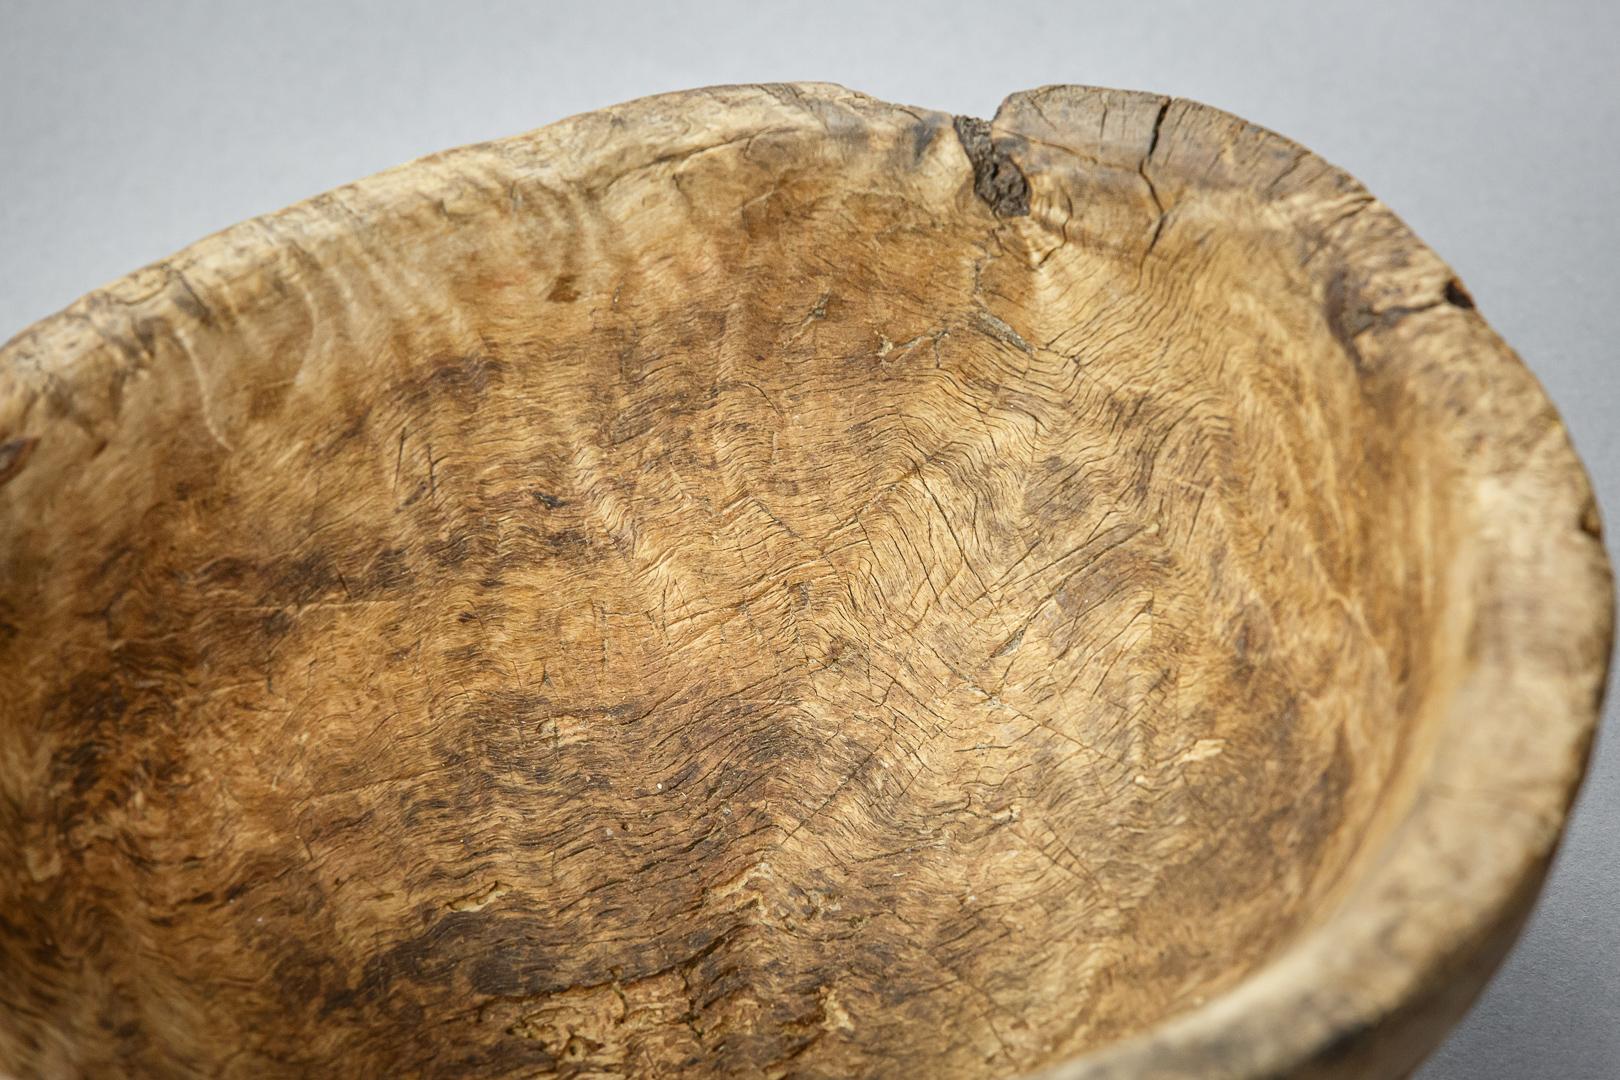 Extraordinary Swedish Burl Knot or Root Bowl In Fair Condition For Sale In Pease pottage, West Sussex